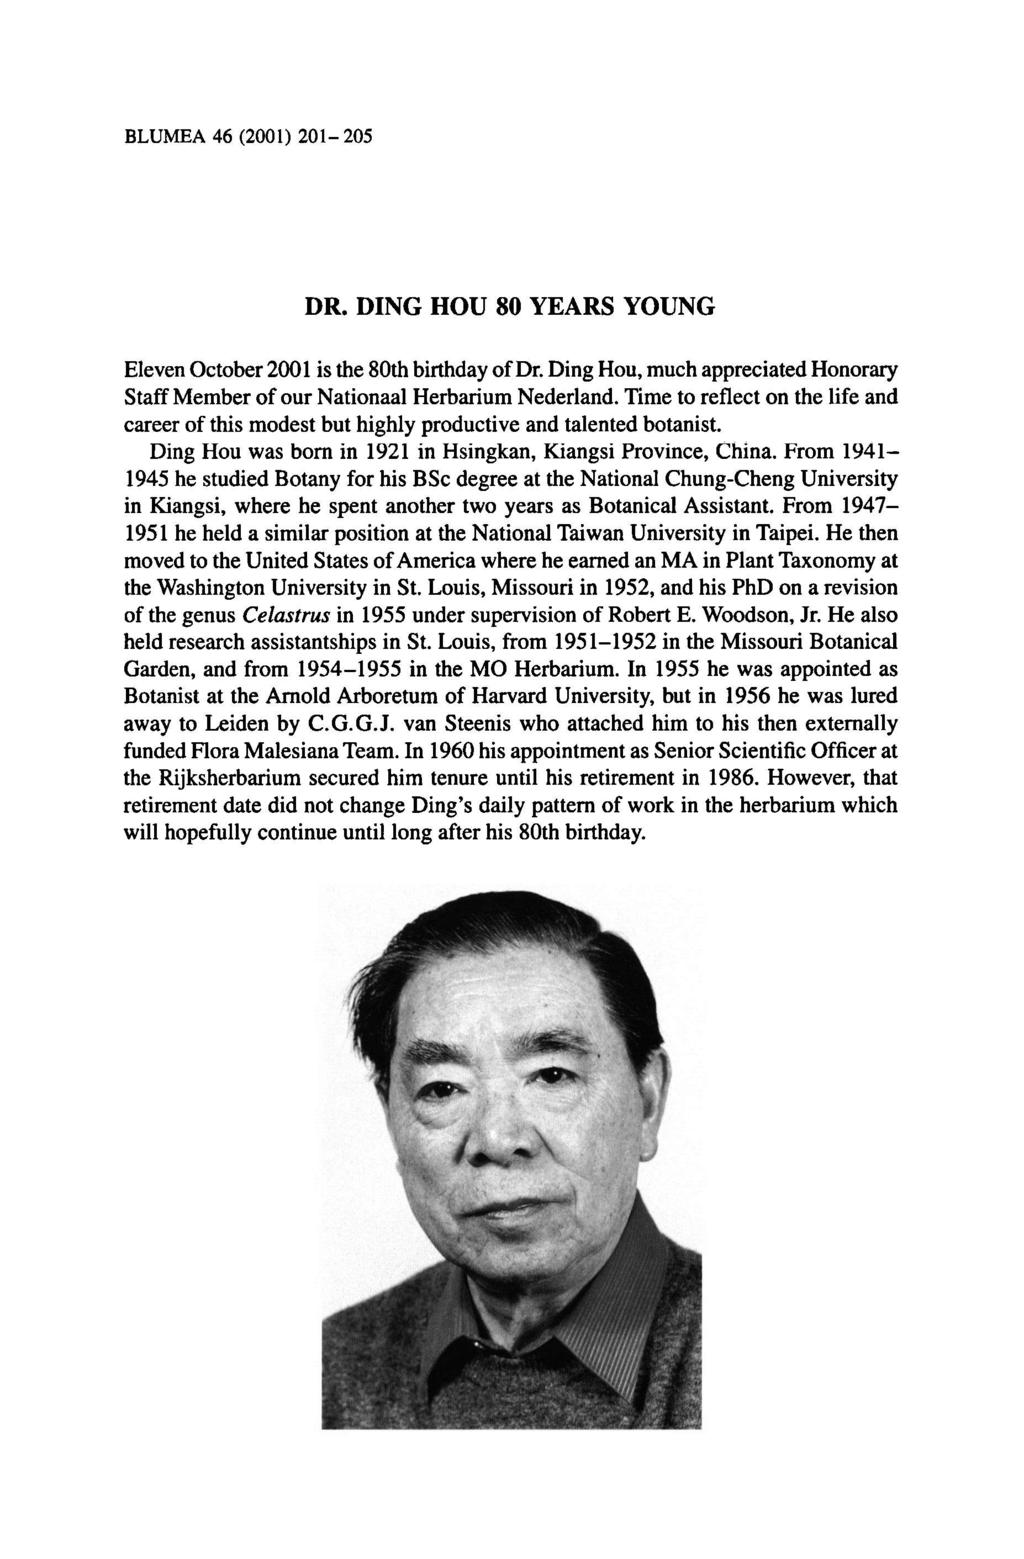 BLUMEA 46 (2001) 201-205 Dr. Ding Hou 80 years young Eleven October 2001 is the 80th birthday of Dr. Ding Hou, much appreciated Honorary Staff Member of our Nationaal HerbariumNederland.